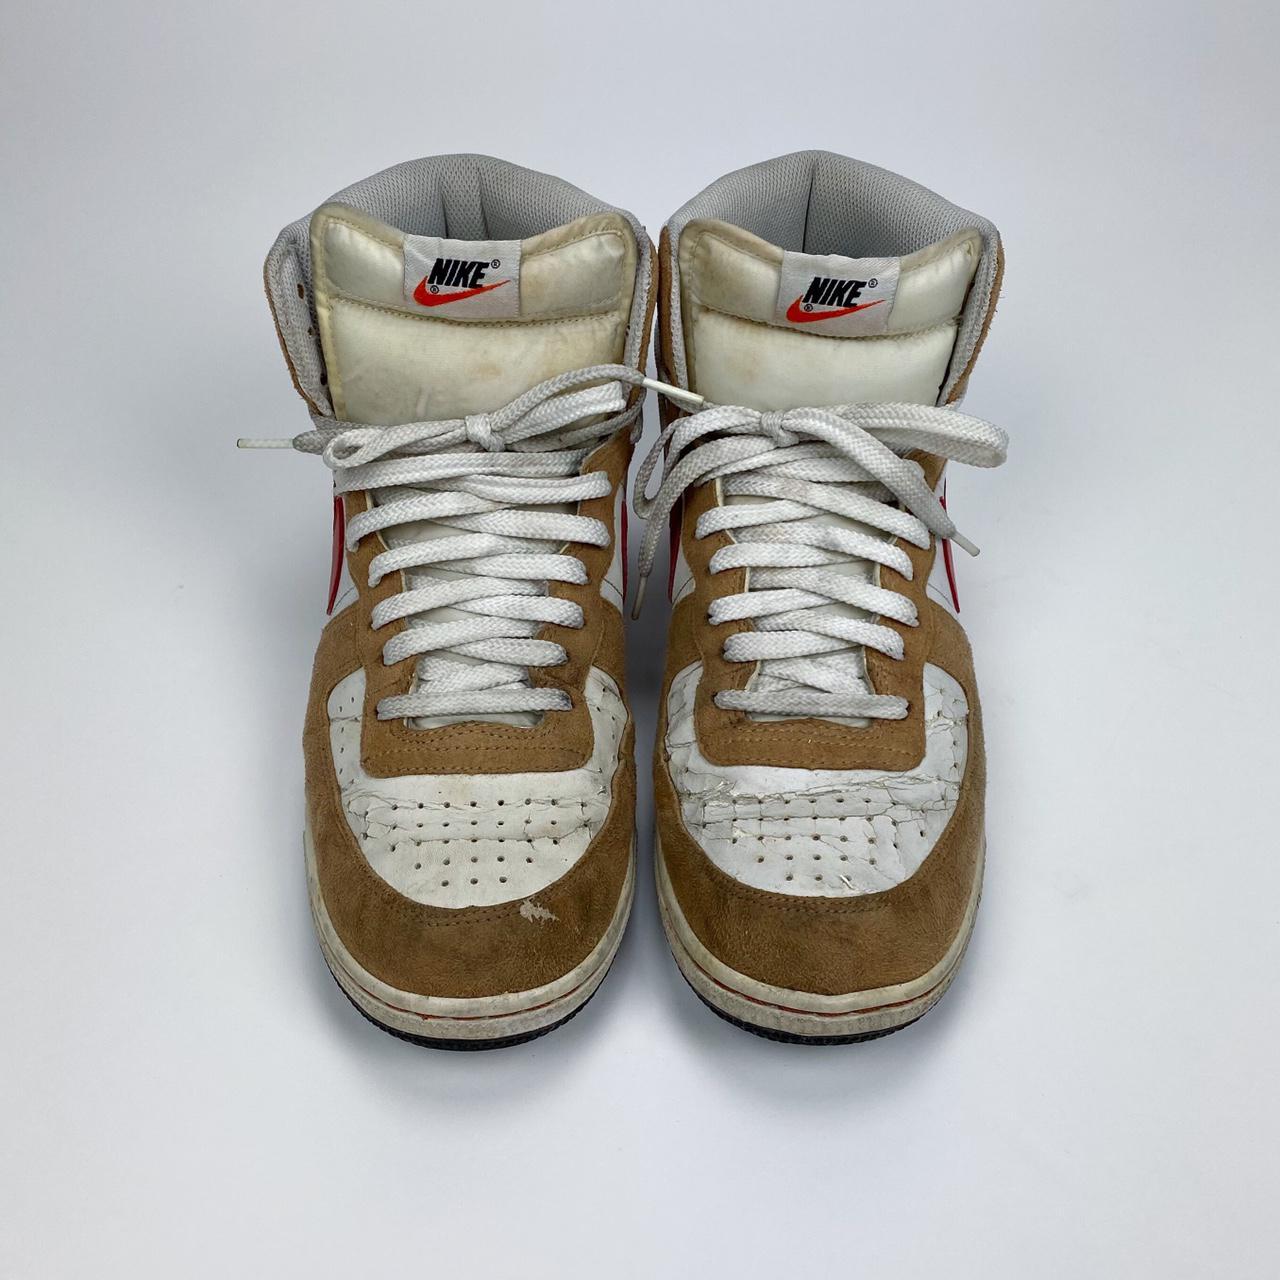 Nike Men's Tan and Red Trainers (2)